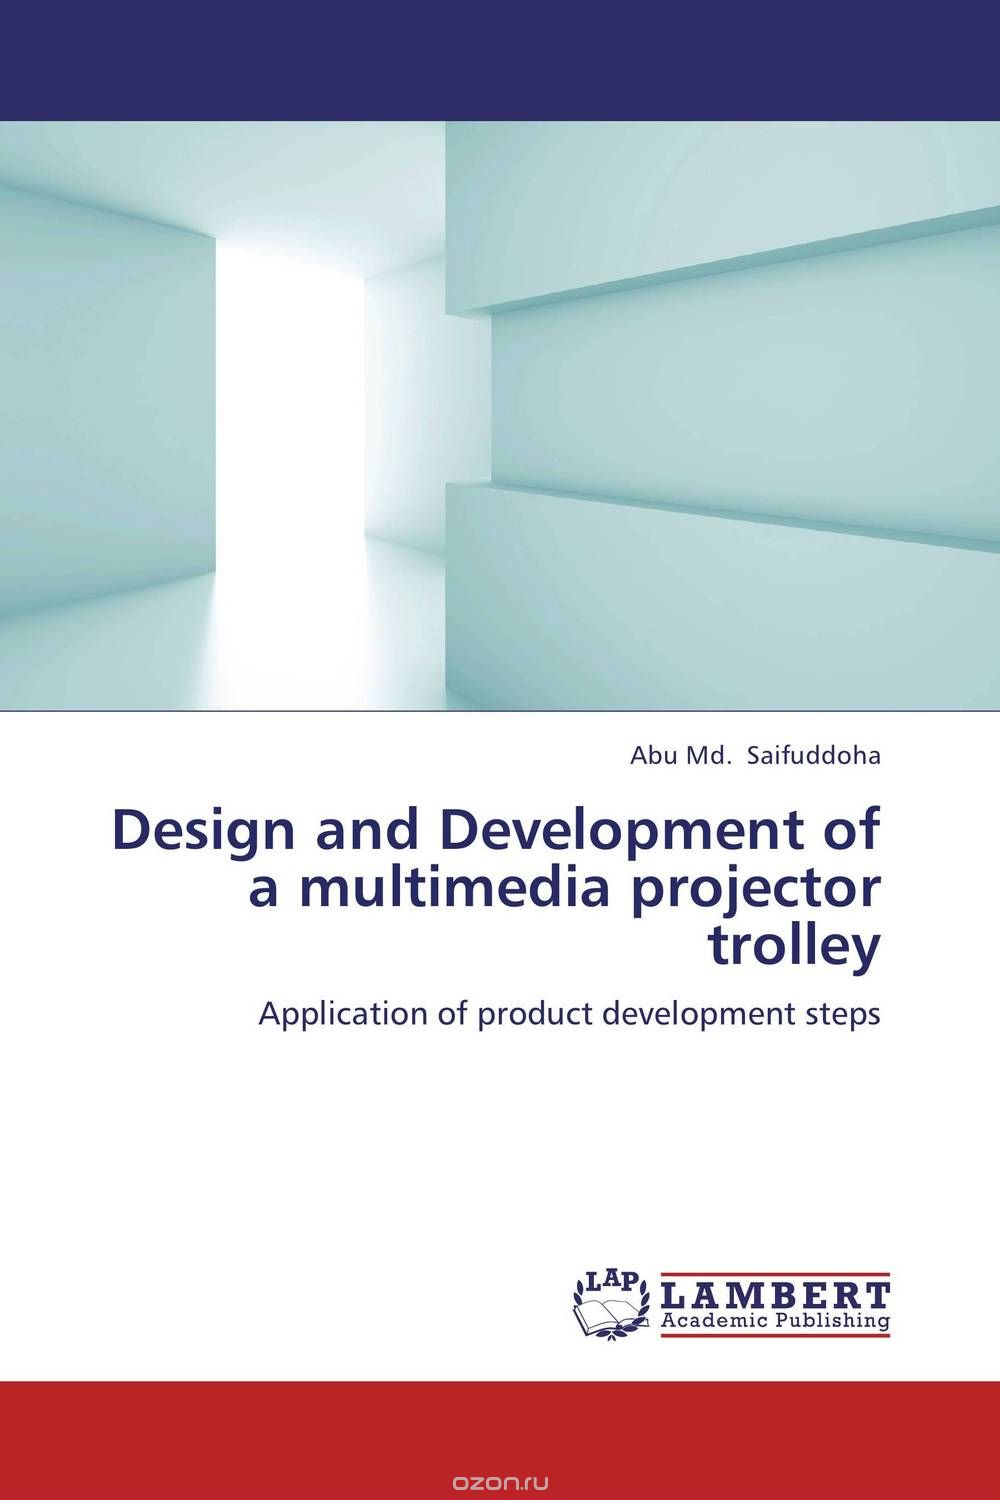 Design and Development of a multimedia projector trolley